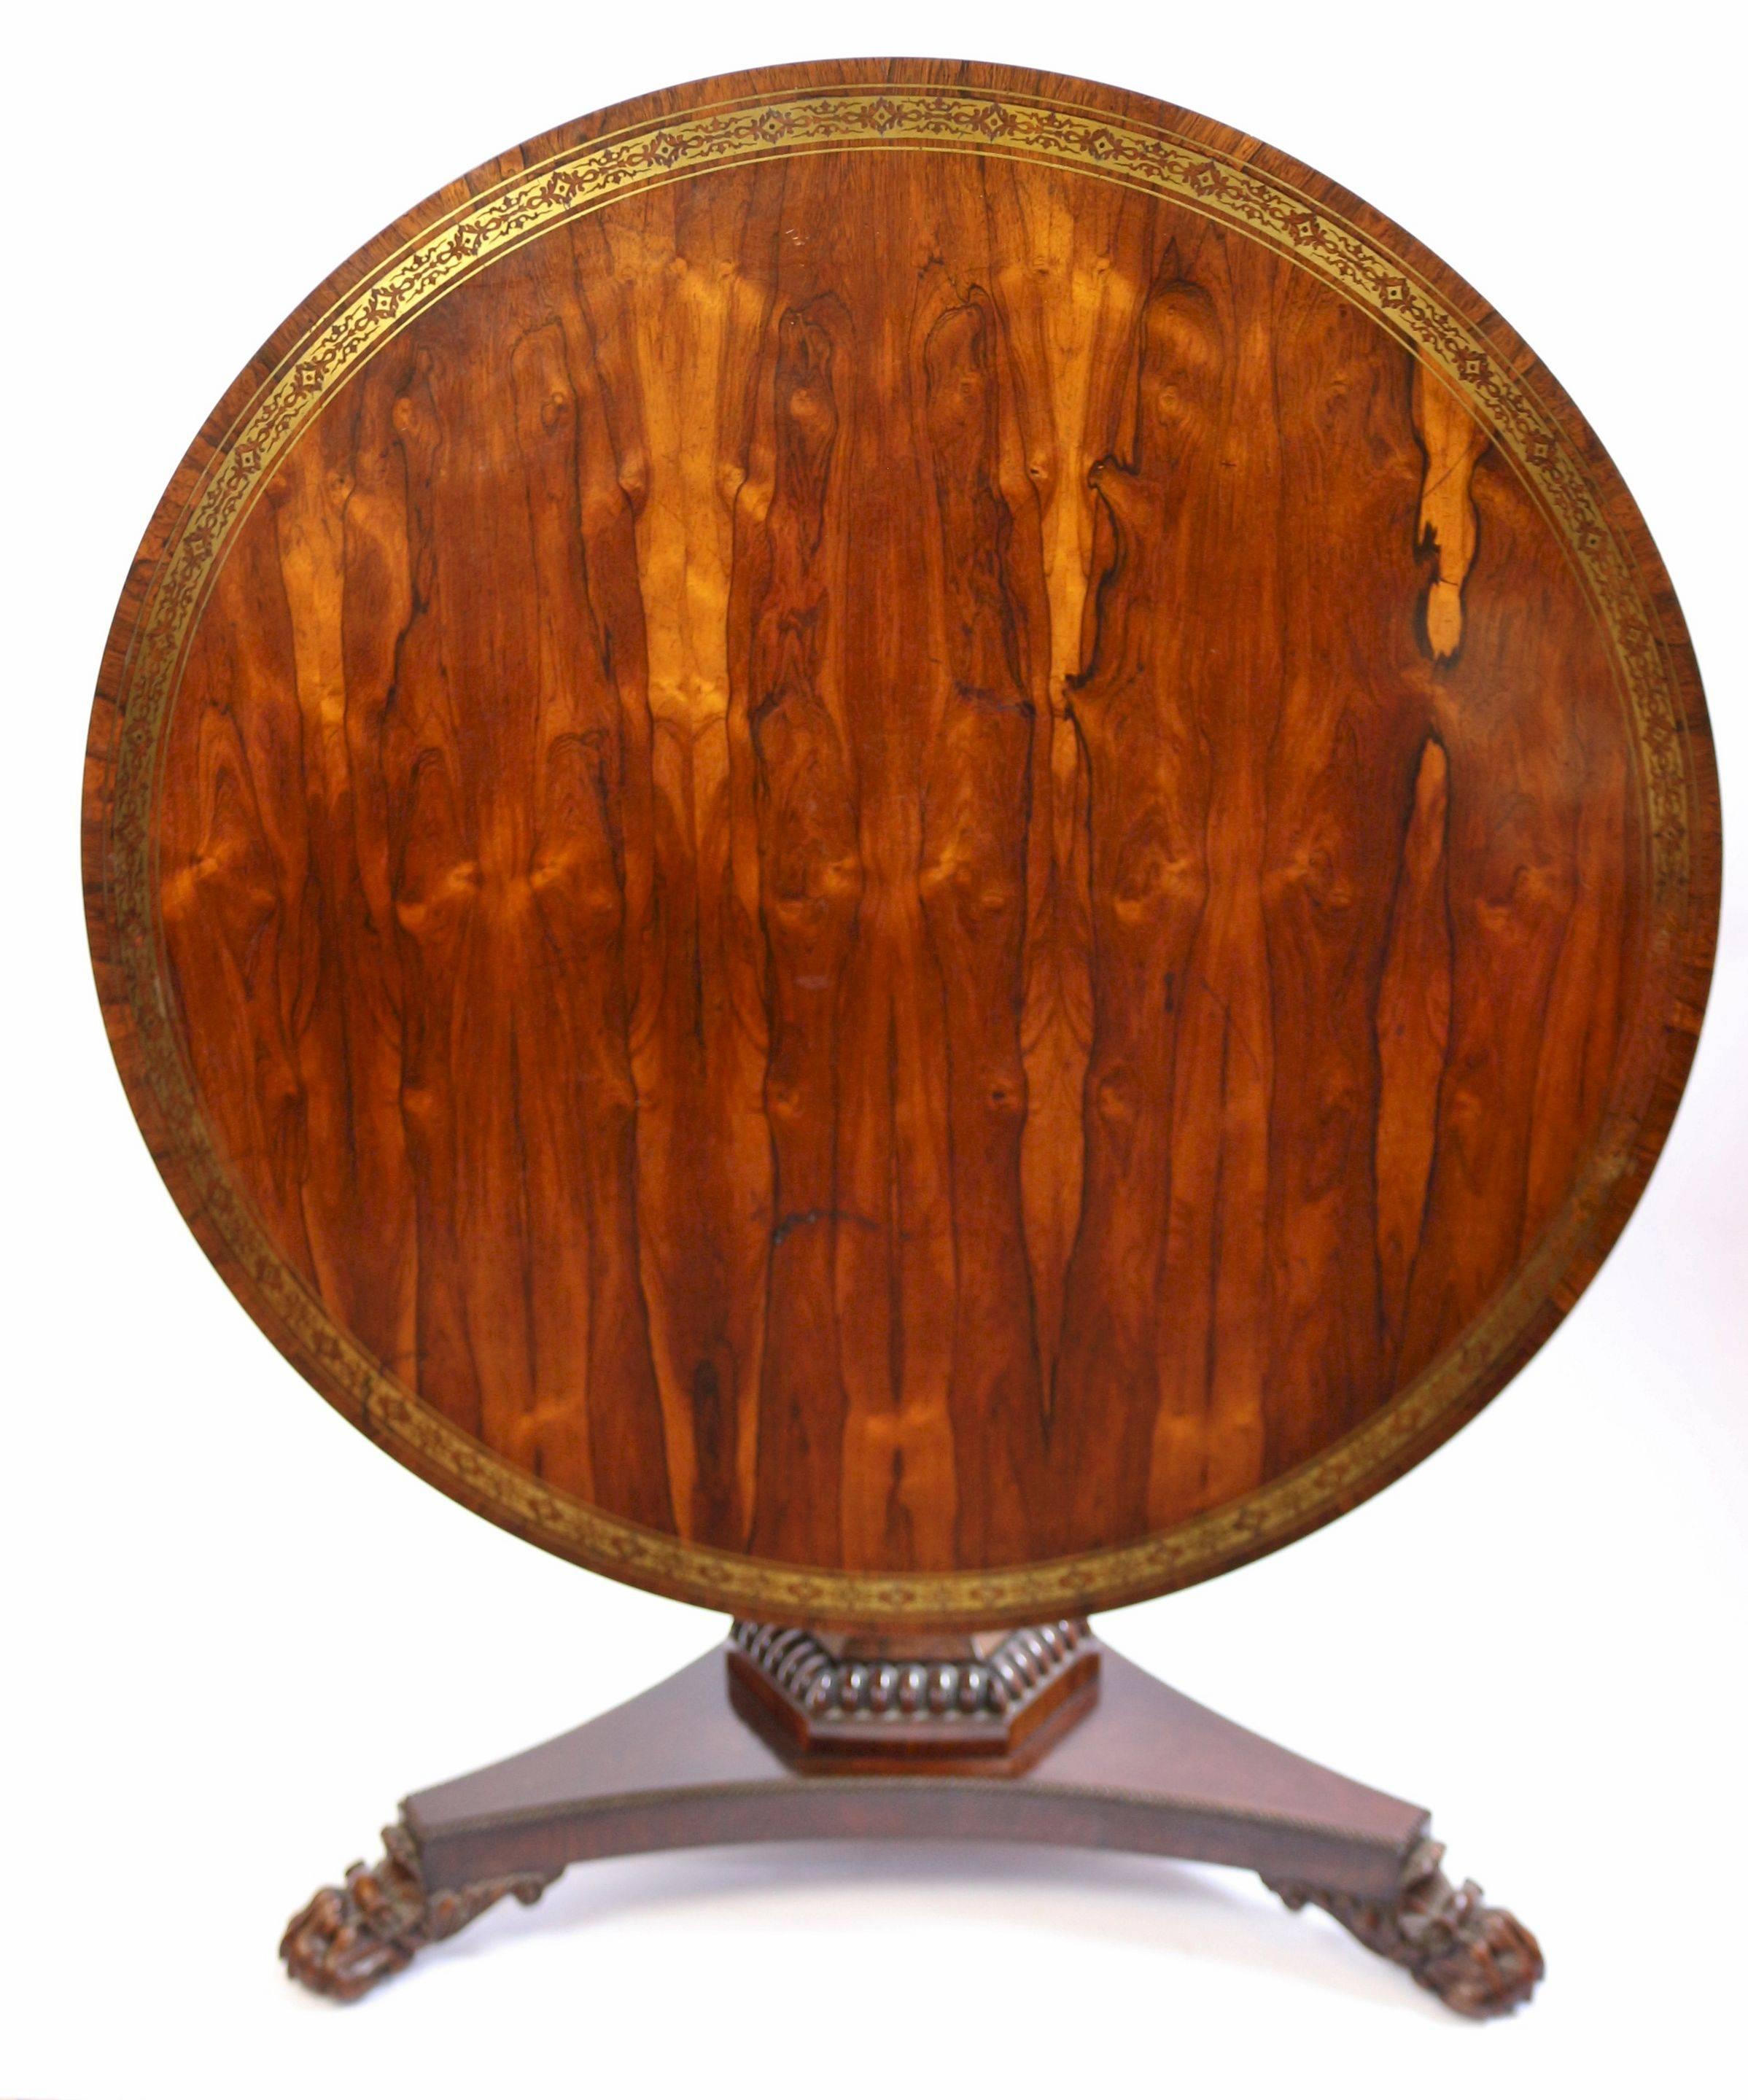 English Fine and Classic Regency Rosewood Pedestal Table